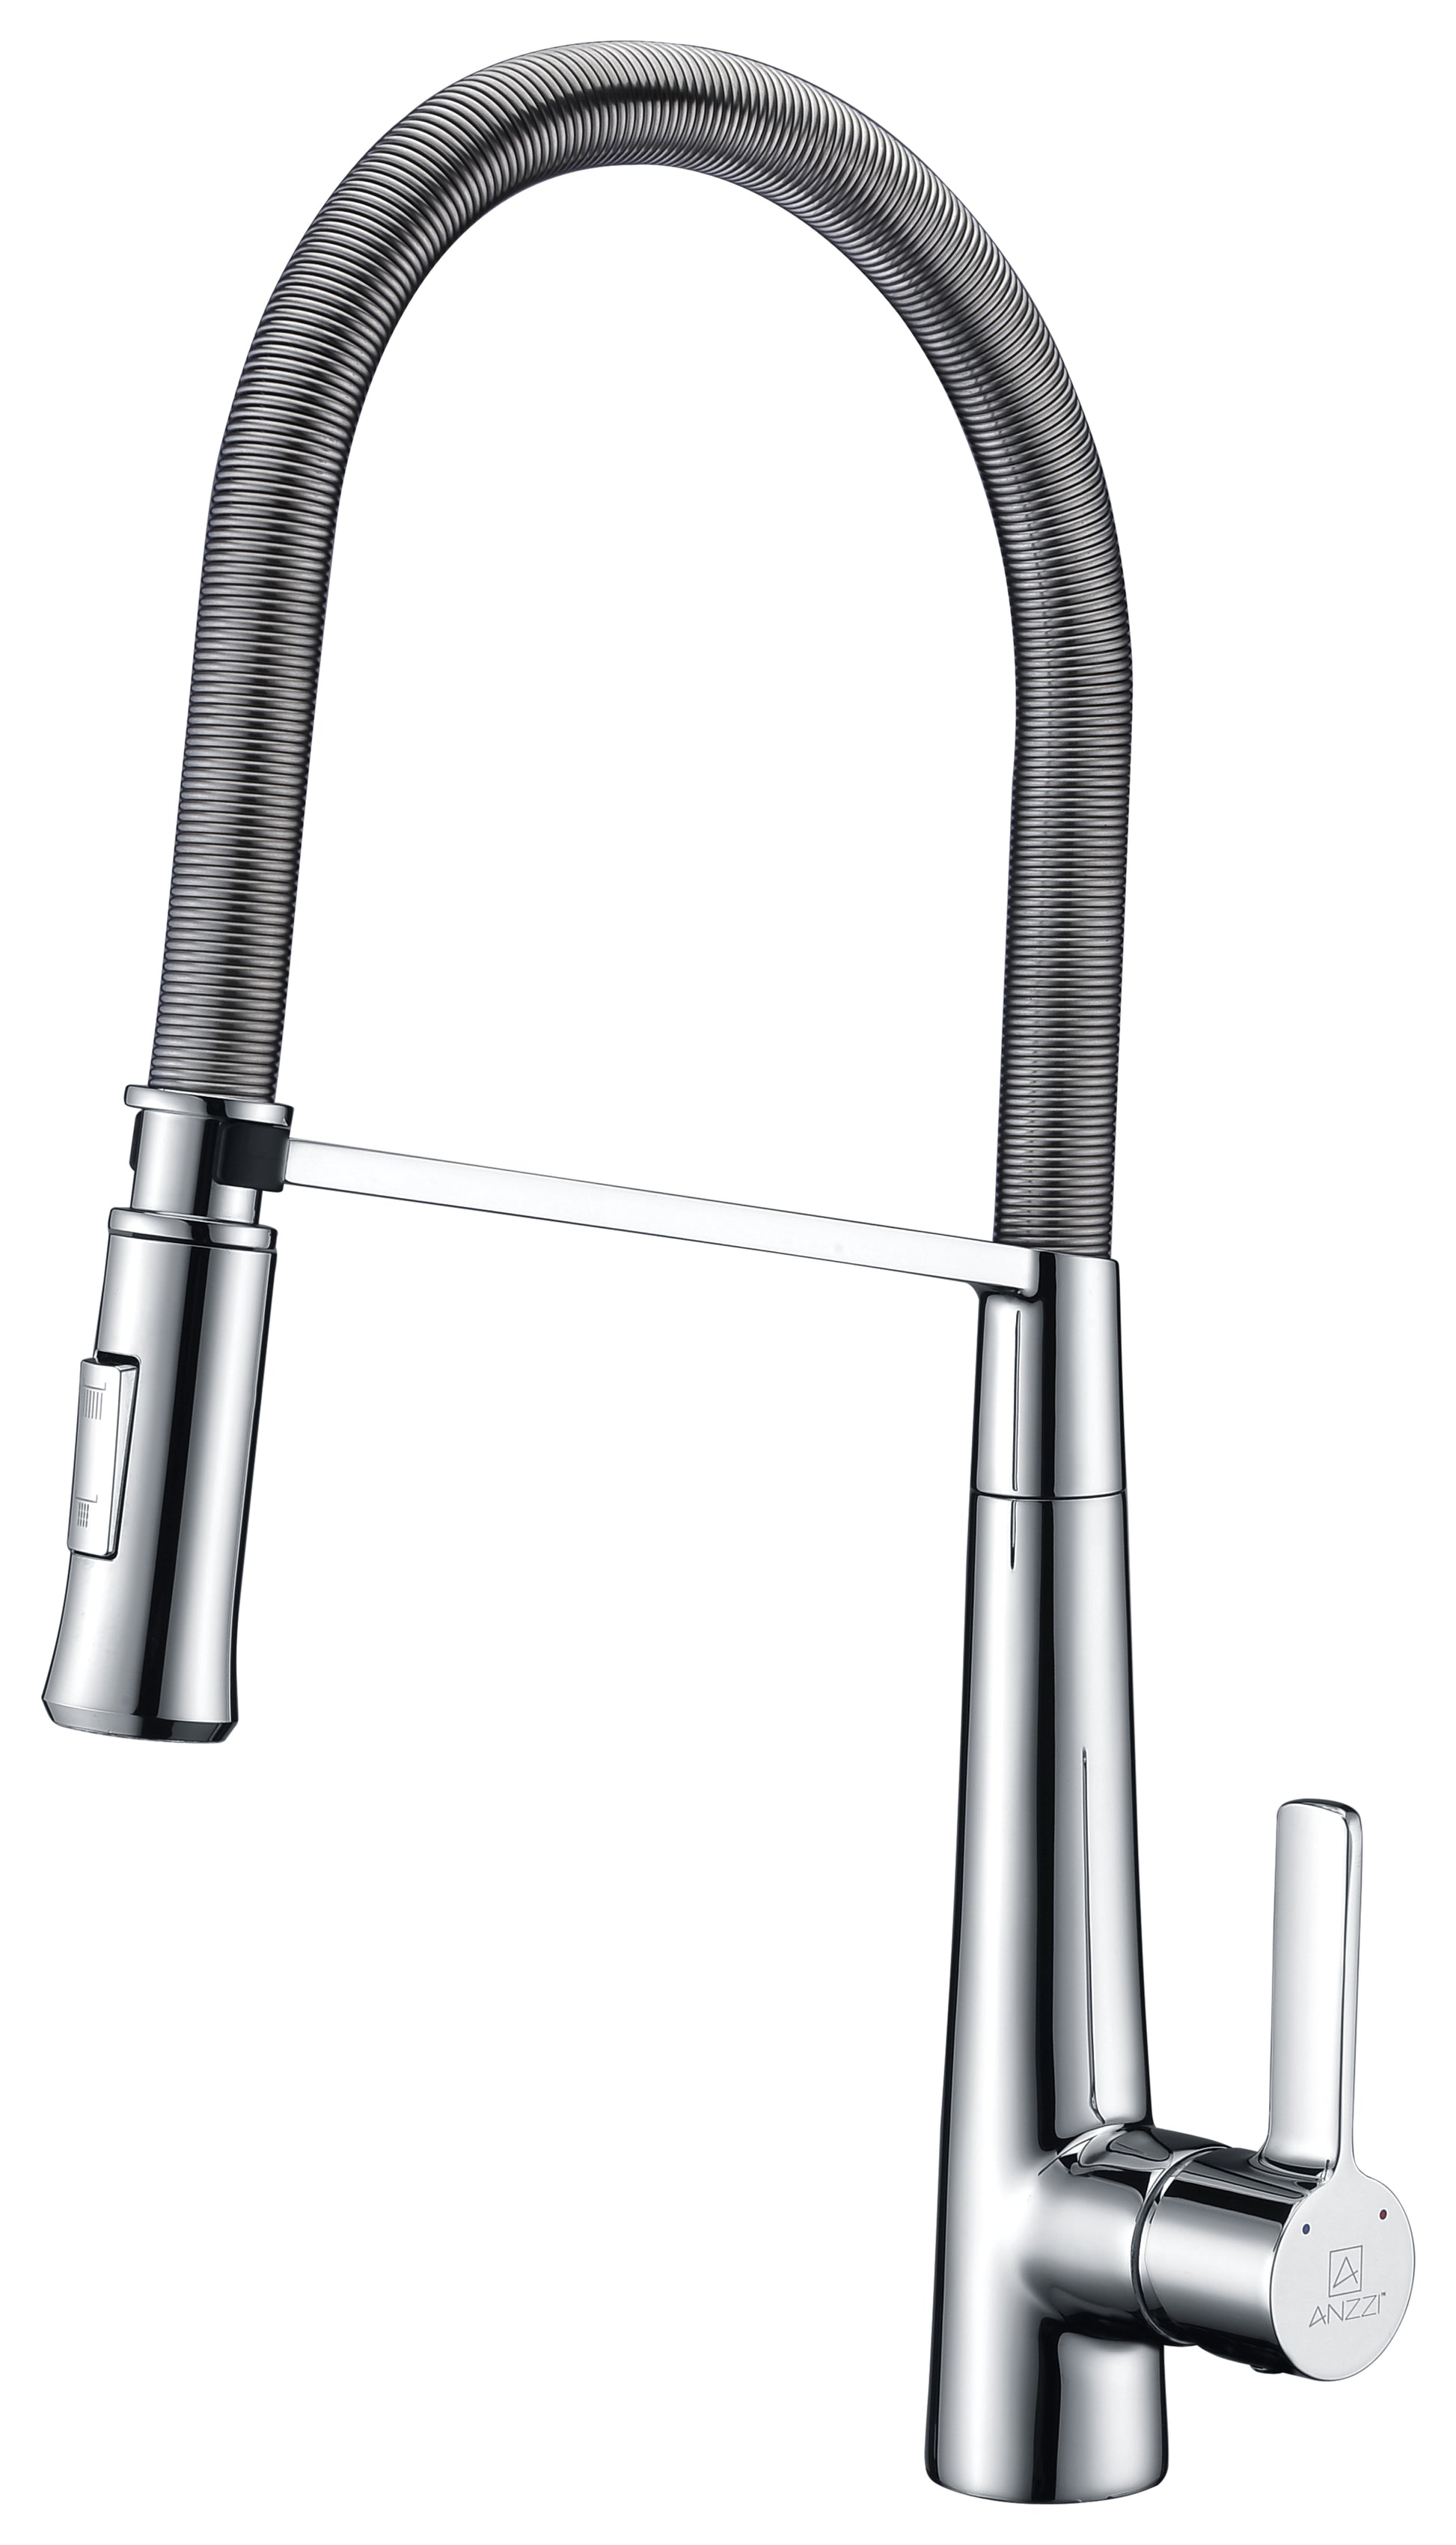 KF-AZ188CH - Apollo Single Handle Pull-Down Sprayer Kitchen Faucet in Polished Chrome